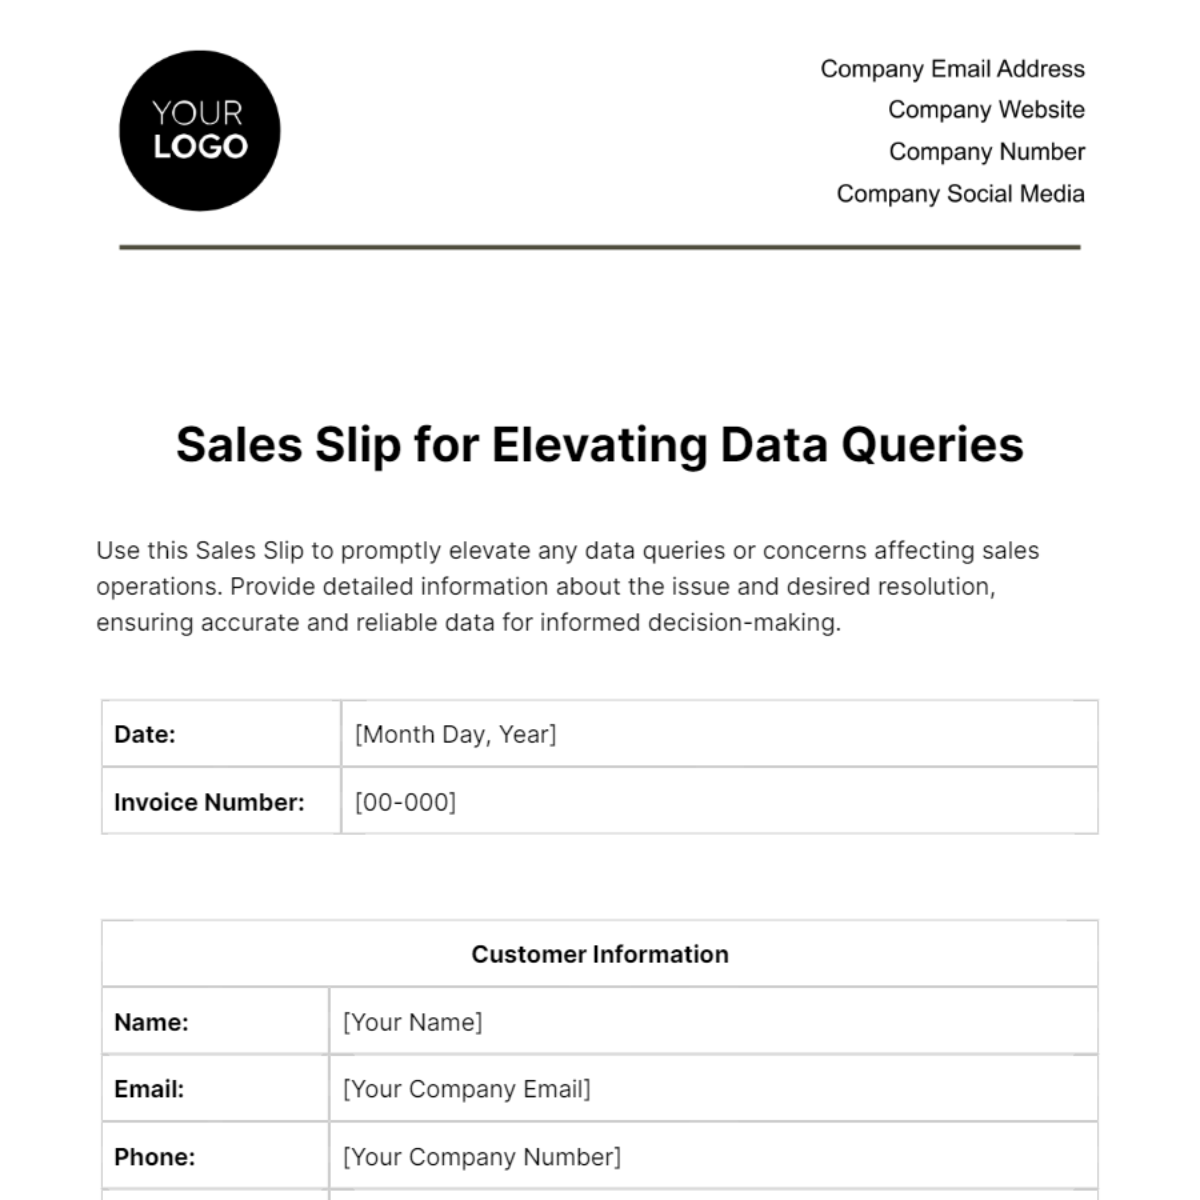 Free Sales Slip for Elevating Data Queries Template